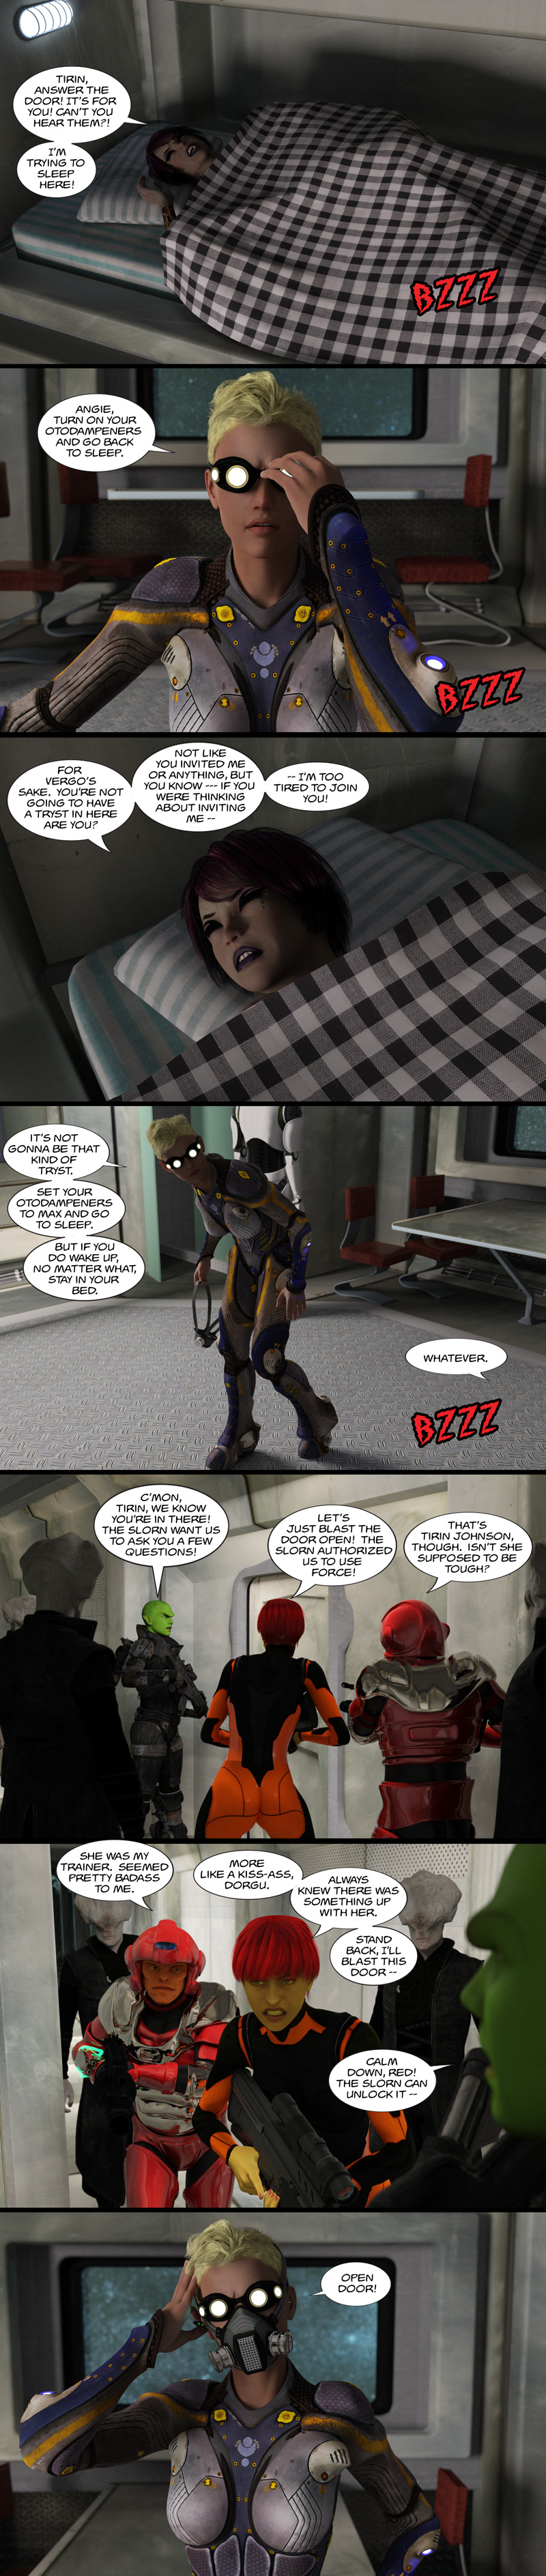 Chapter 13, page 27 – Knock! Knock! Where is Abby?!